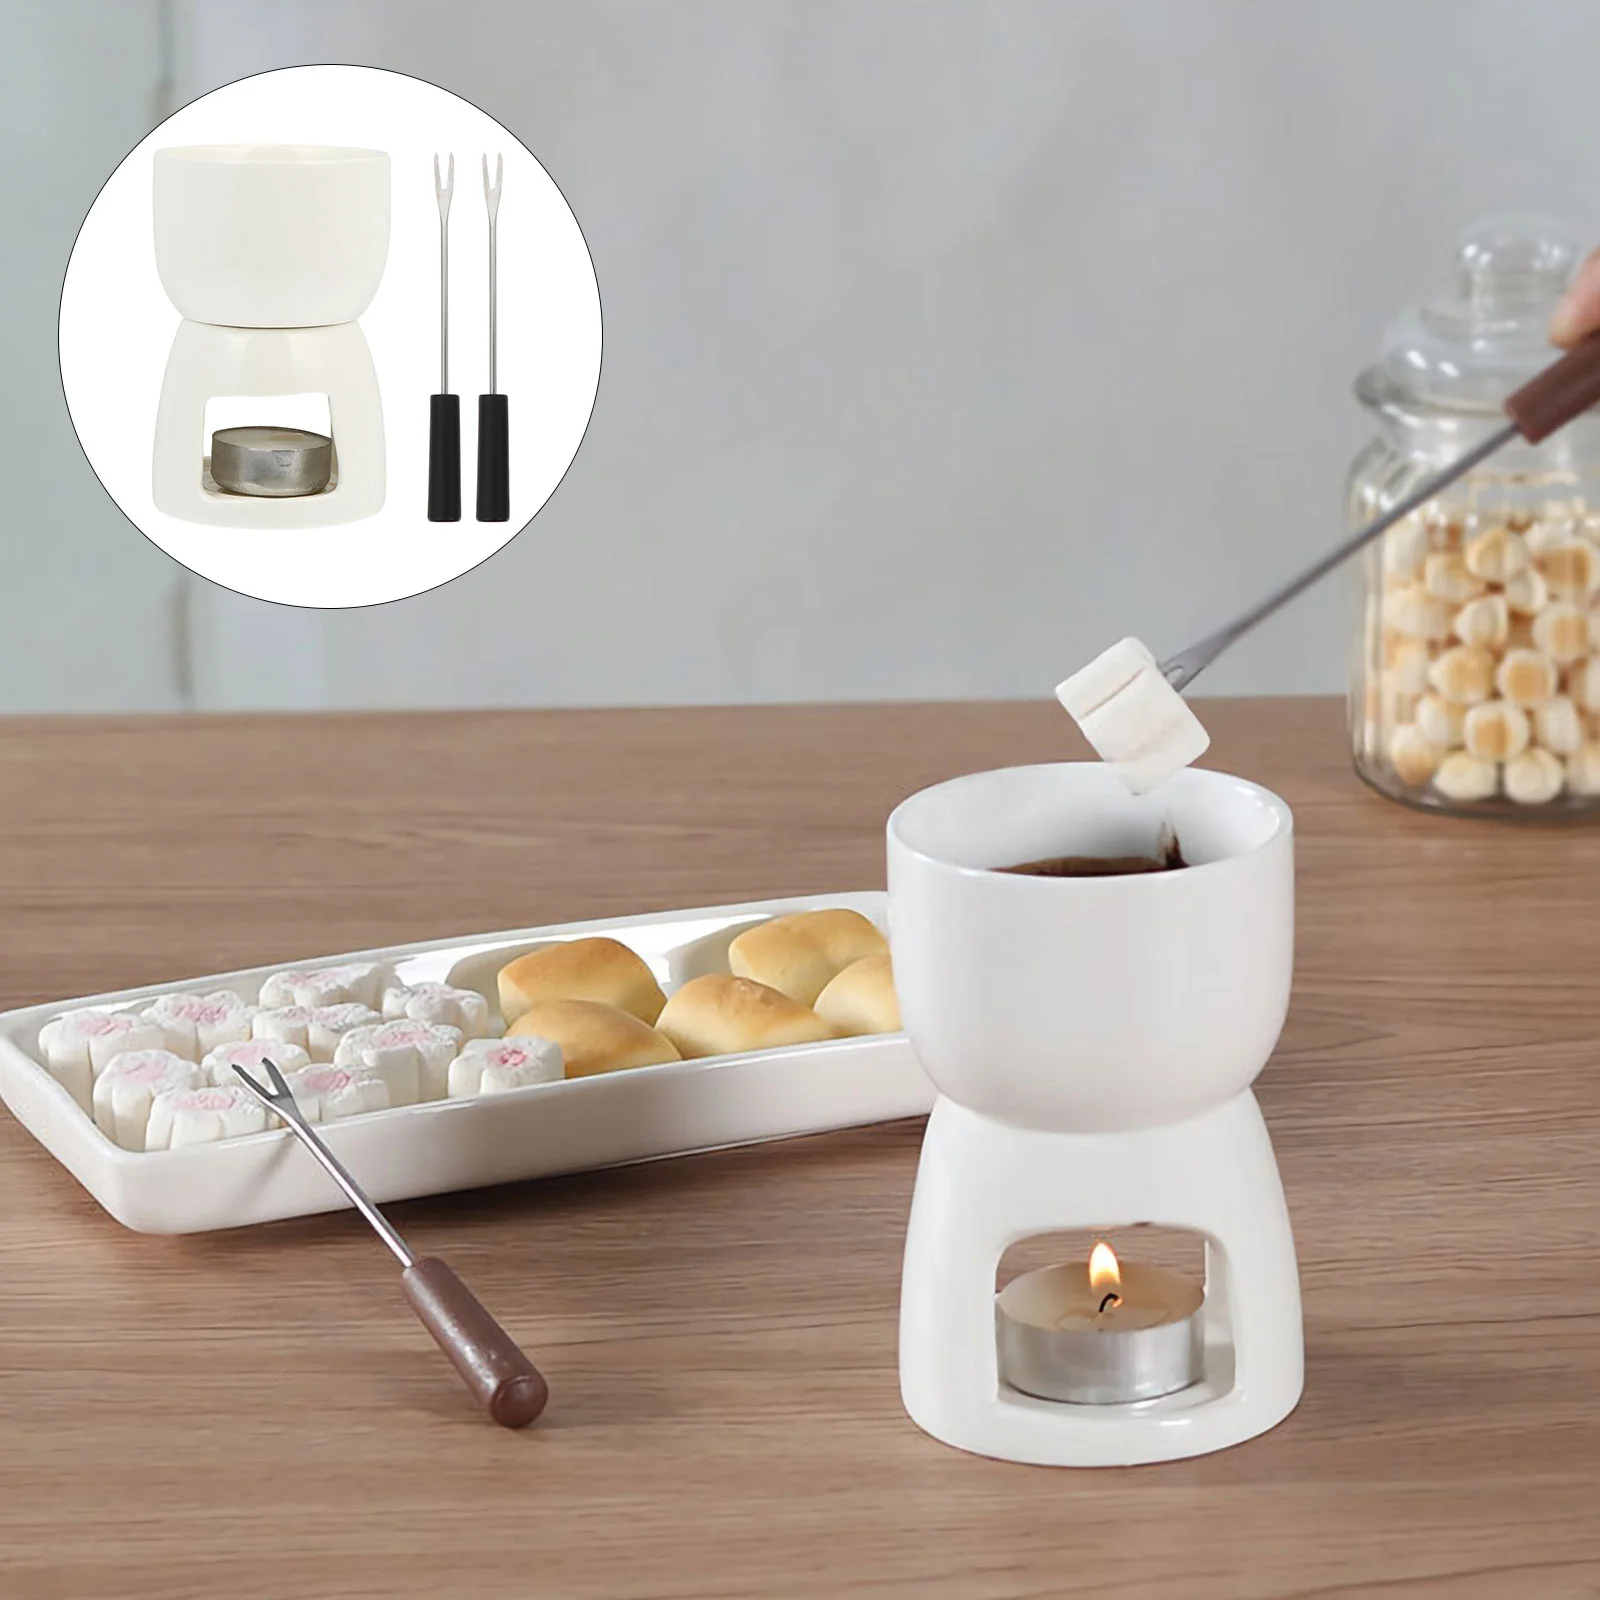 

1 Set Chocolate Fondue Pot Butter Warmer Bowl Porcelain Butter Warmer With Tealight Cheese Chocolate Seafood Serving With 2